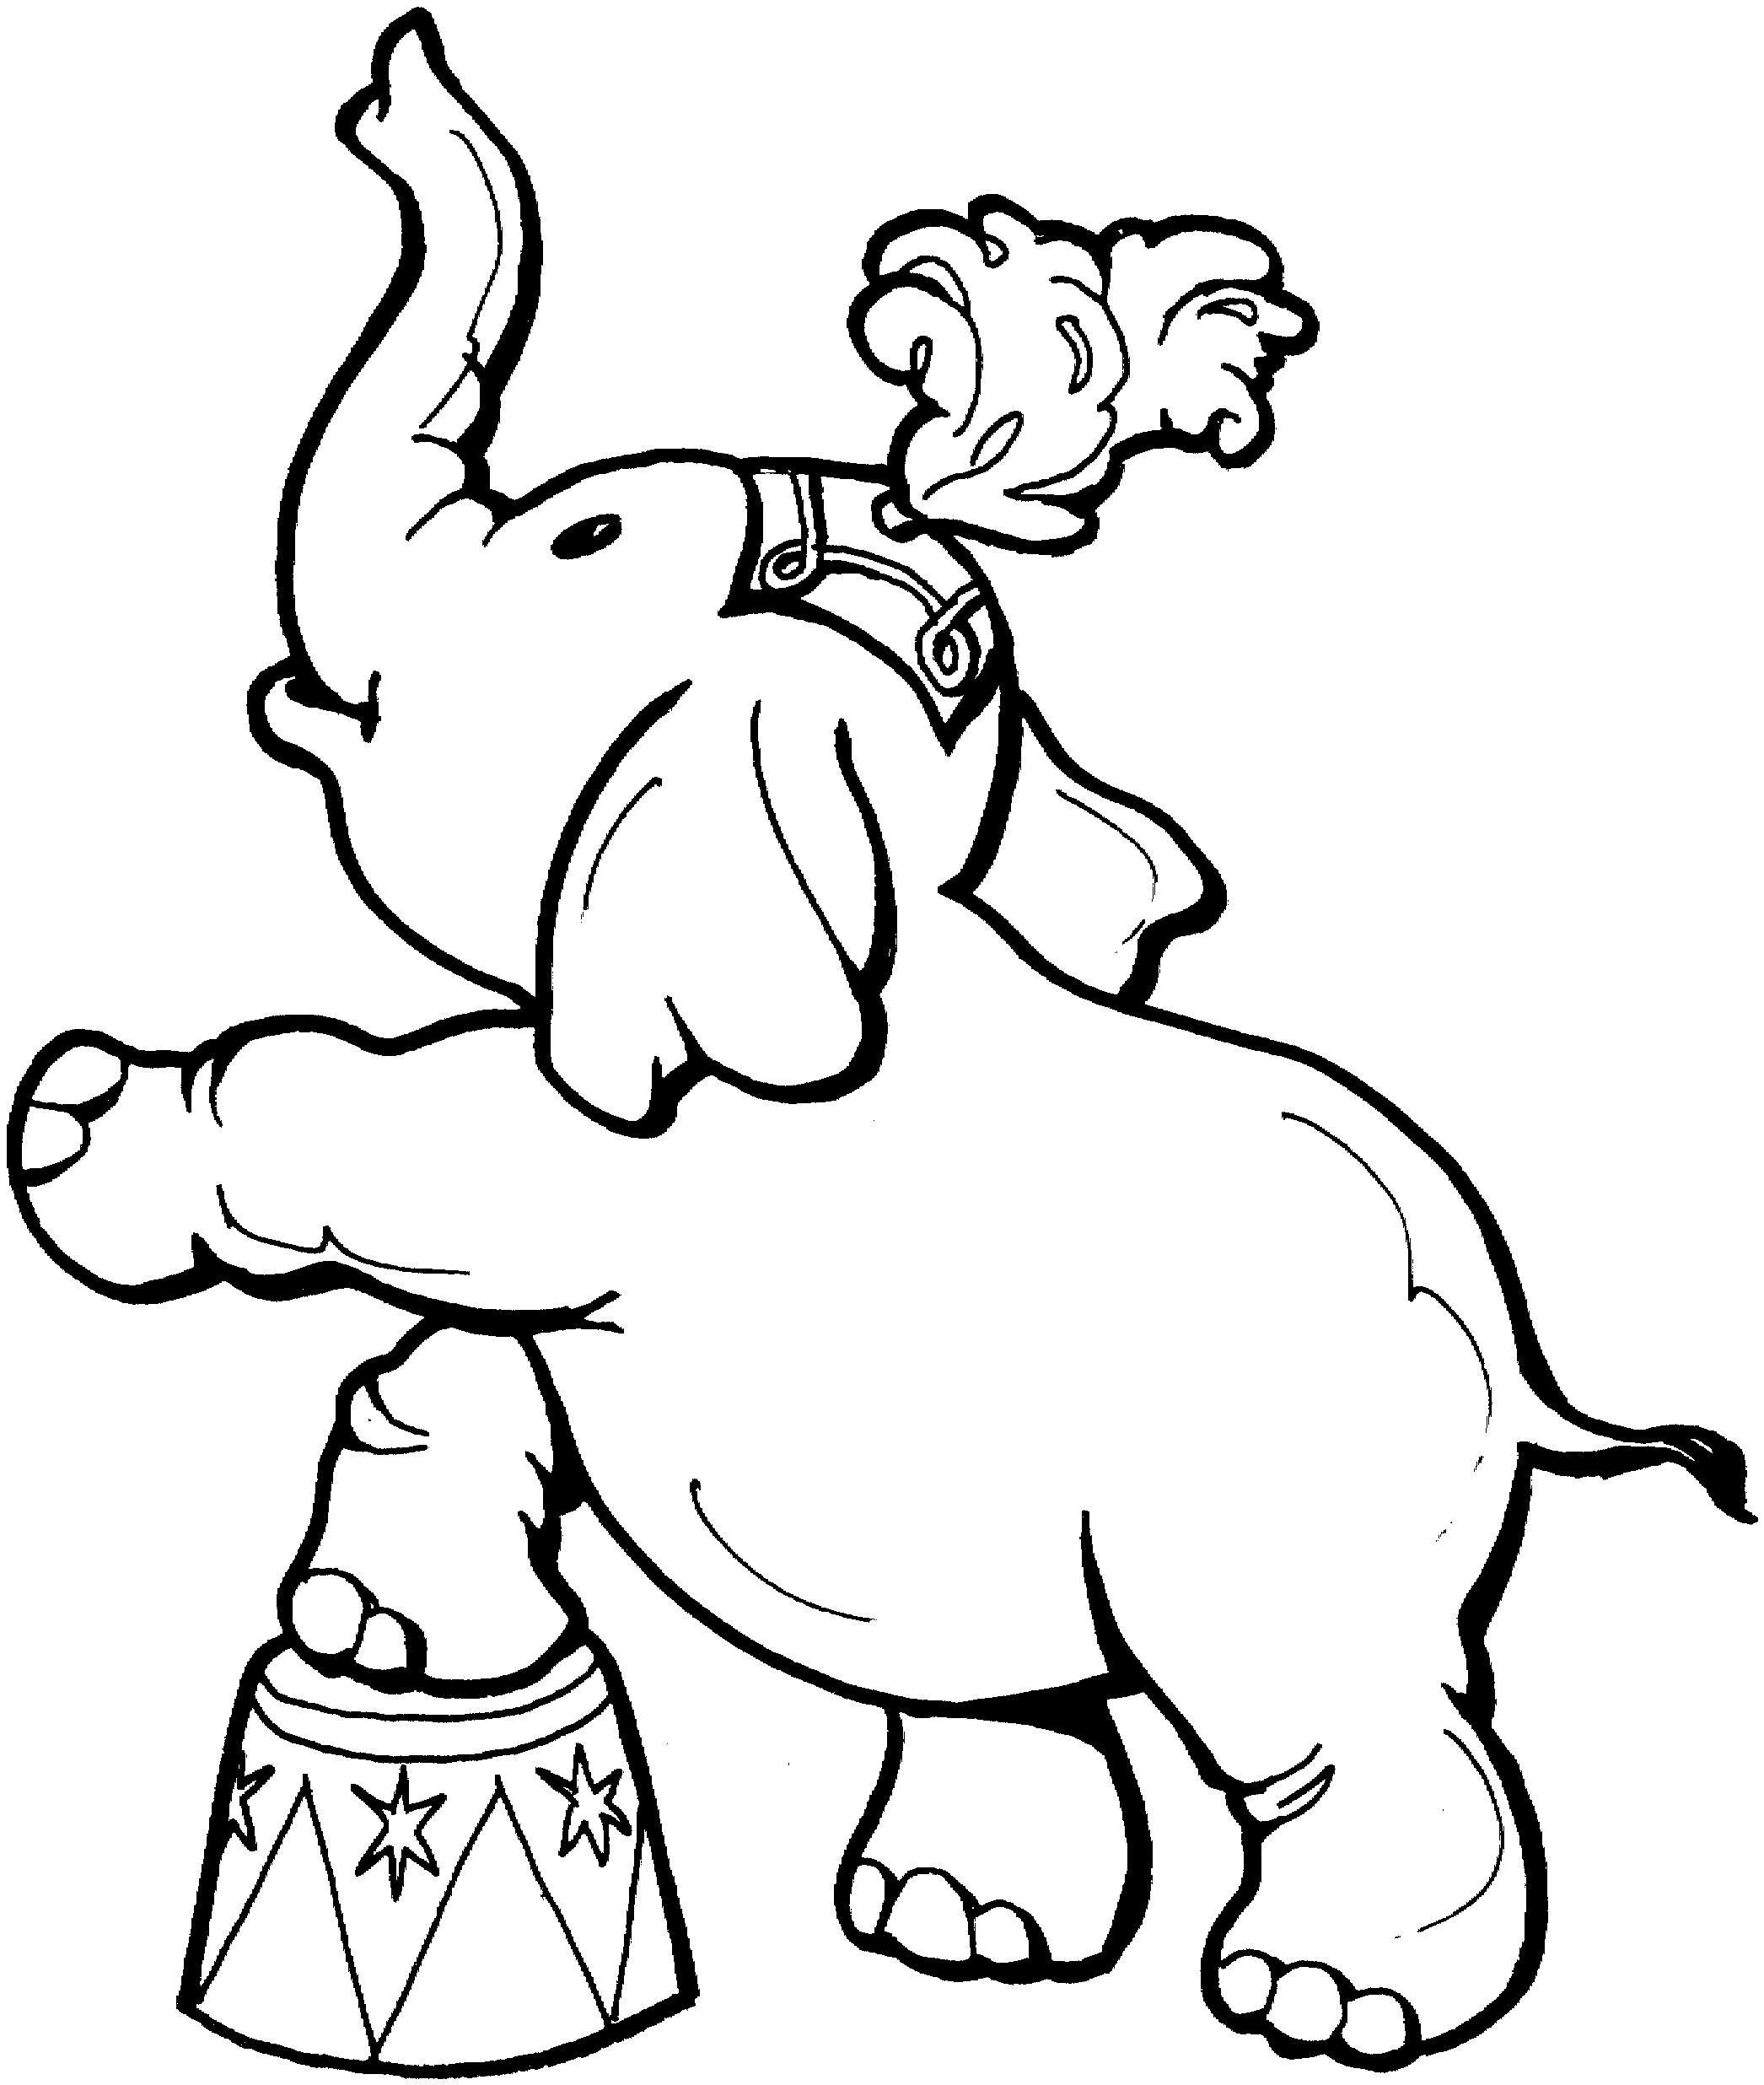 Elephant Coloring Pages Printable
 Free Elephant Coloring Pages